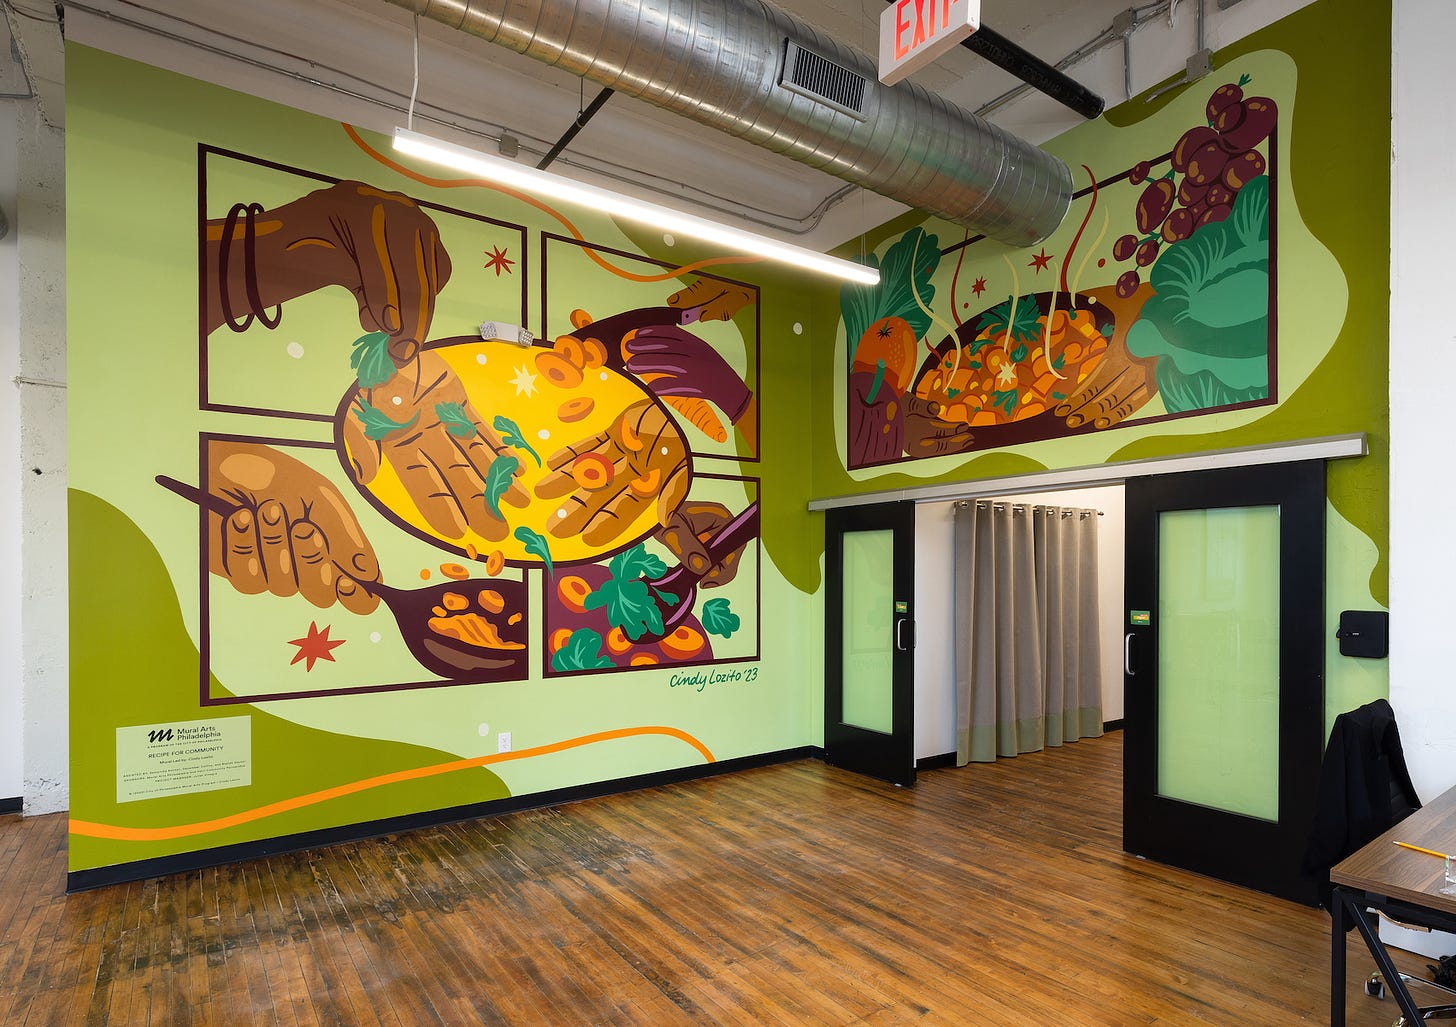 A mural featuring comics, hands, food preparation, and lush vegetables